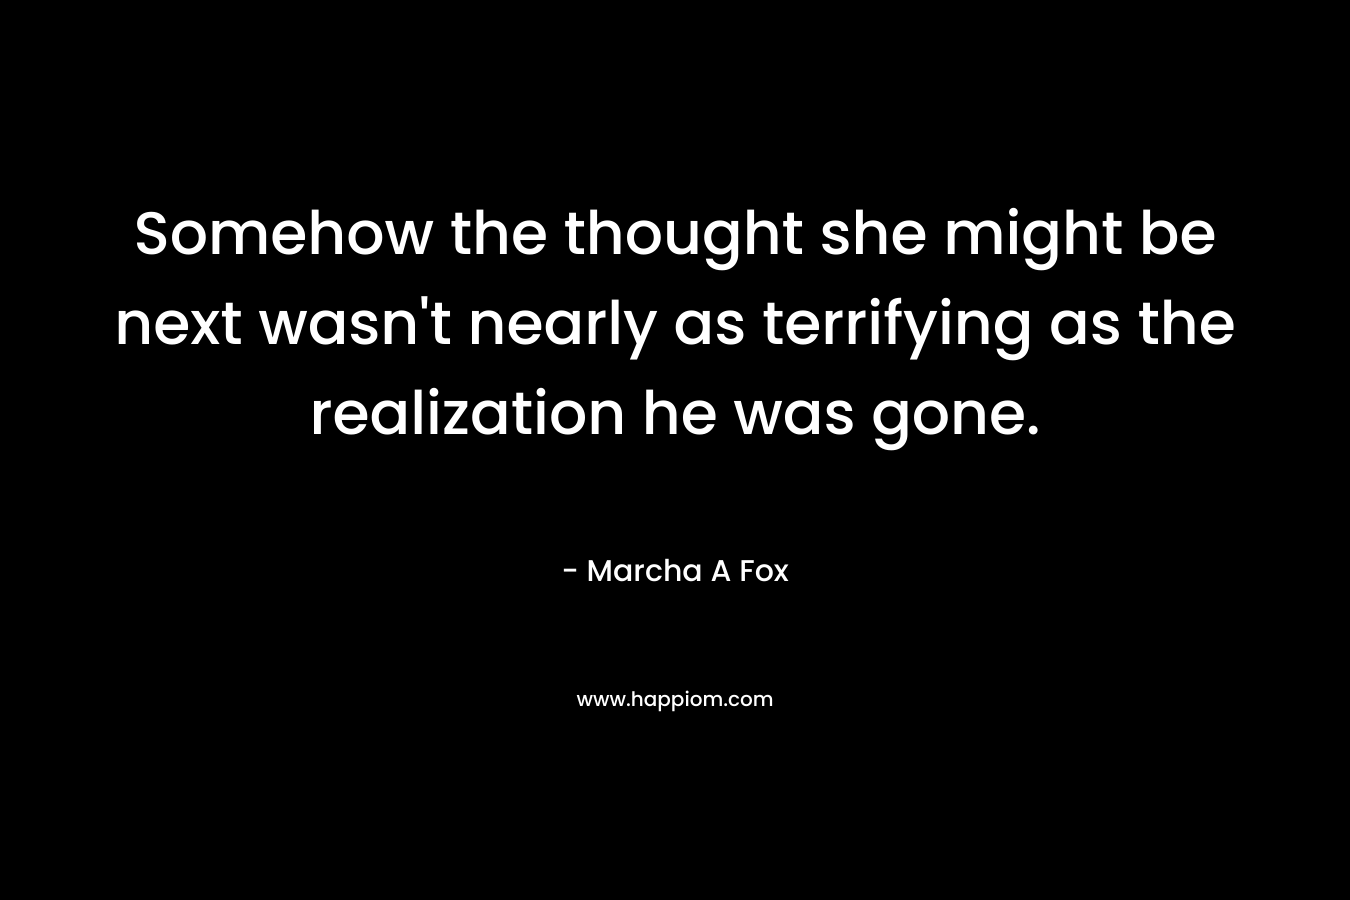 Somehow the thought she might be next wasn’t nearly as terrifying as the realization he was gone. – Marcha A Fox